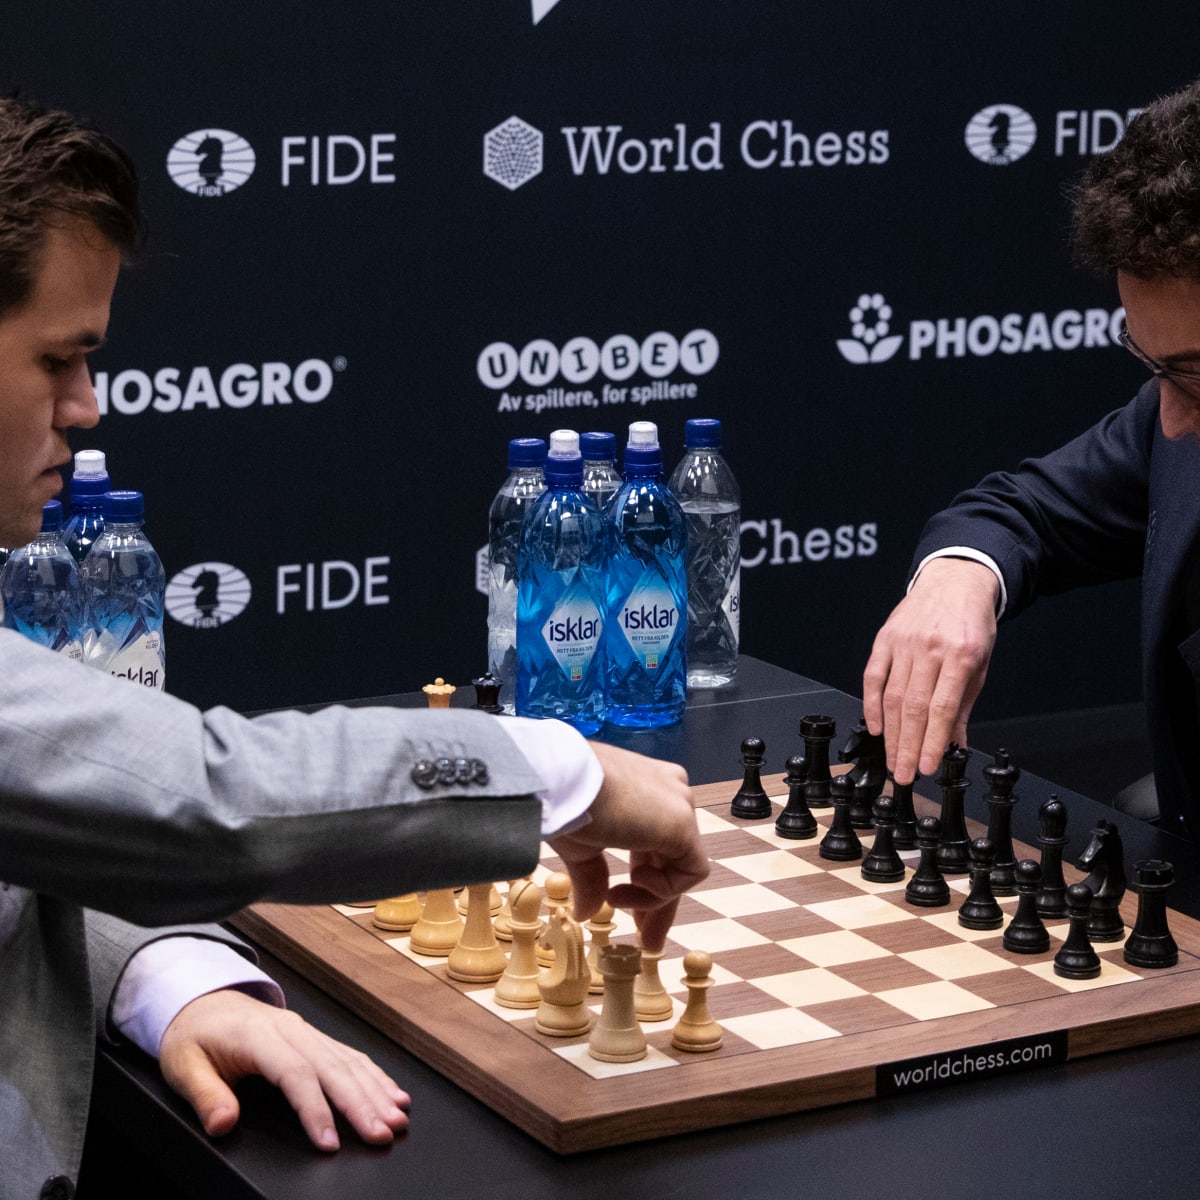 Play in a Chess World Championship